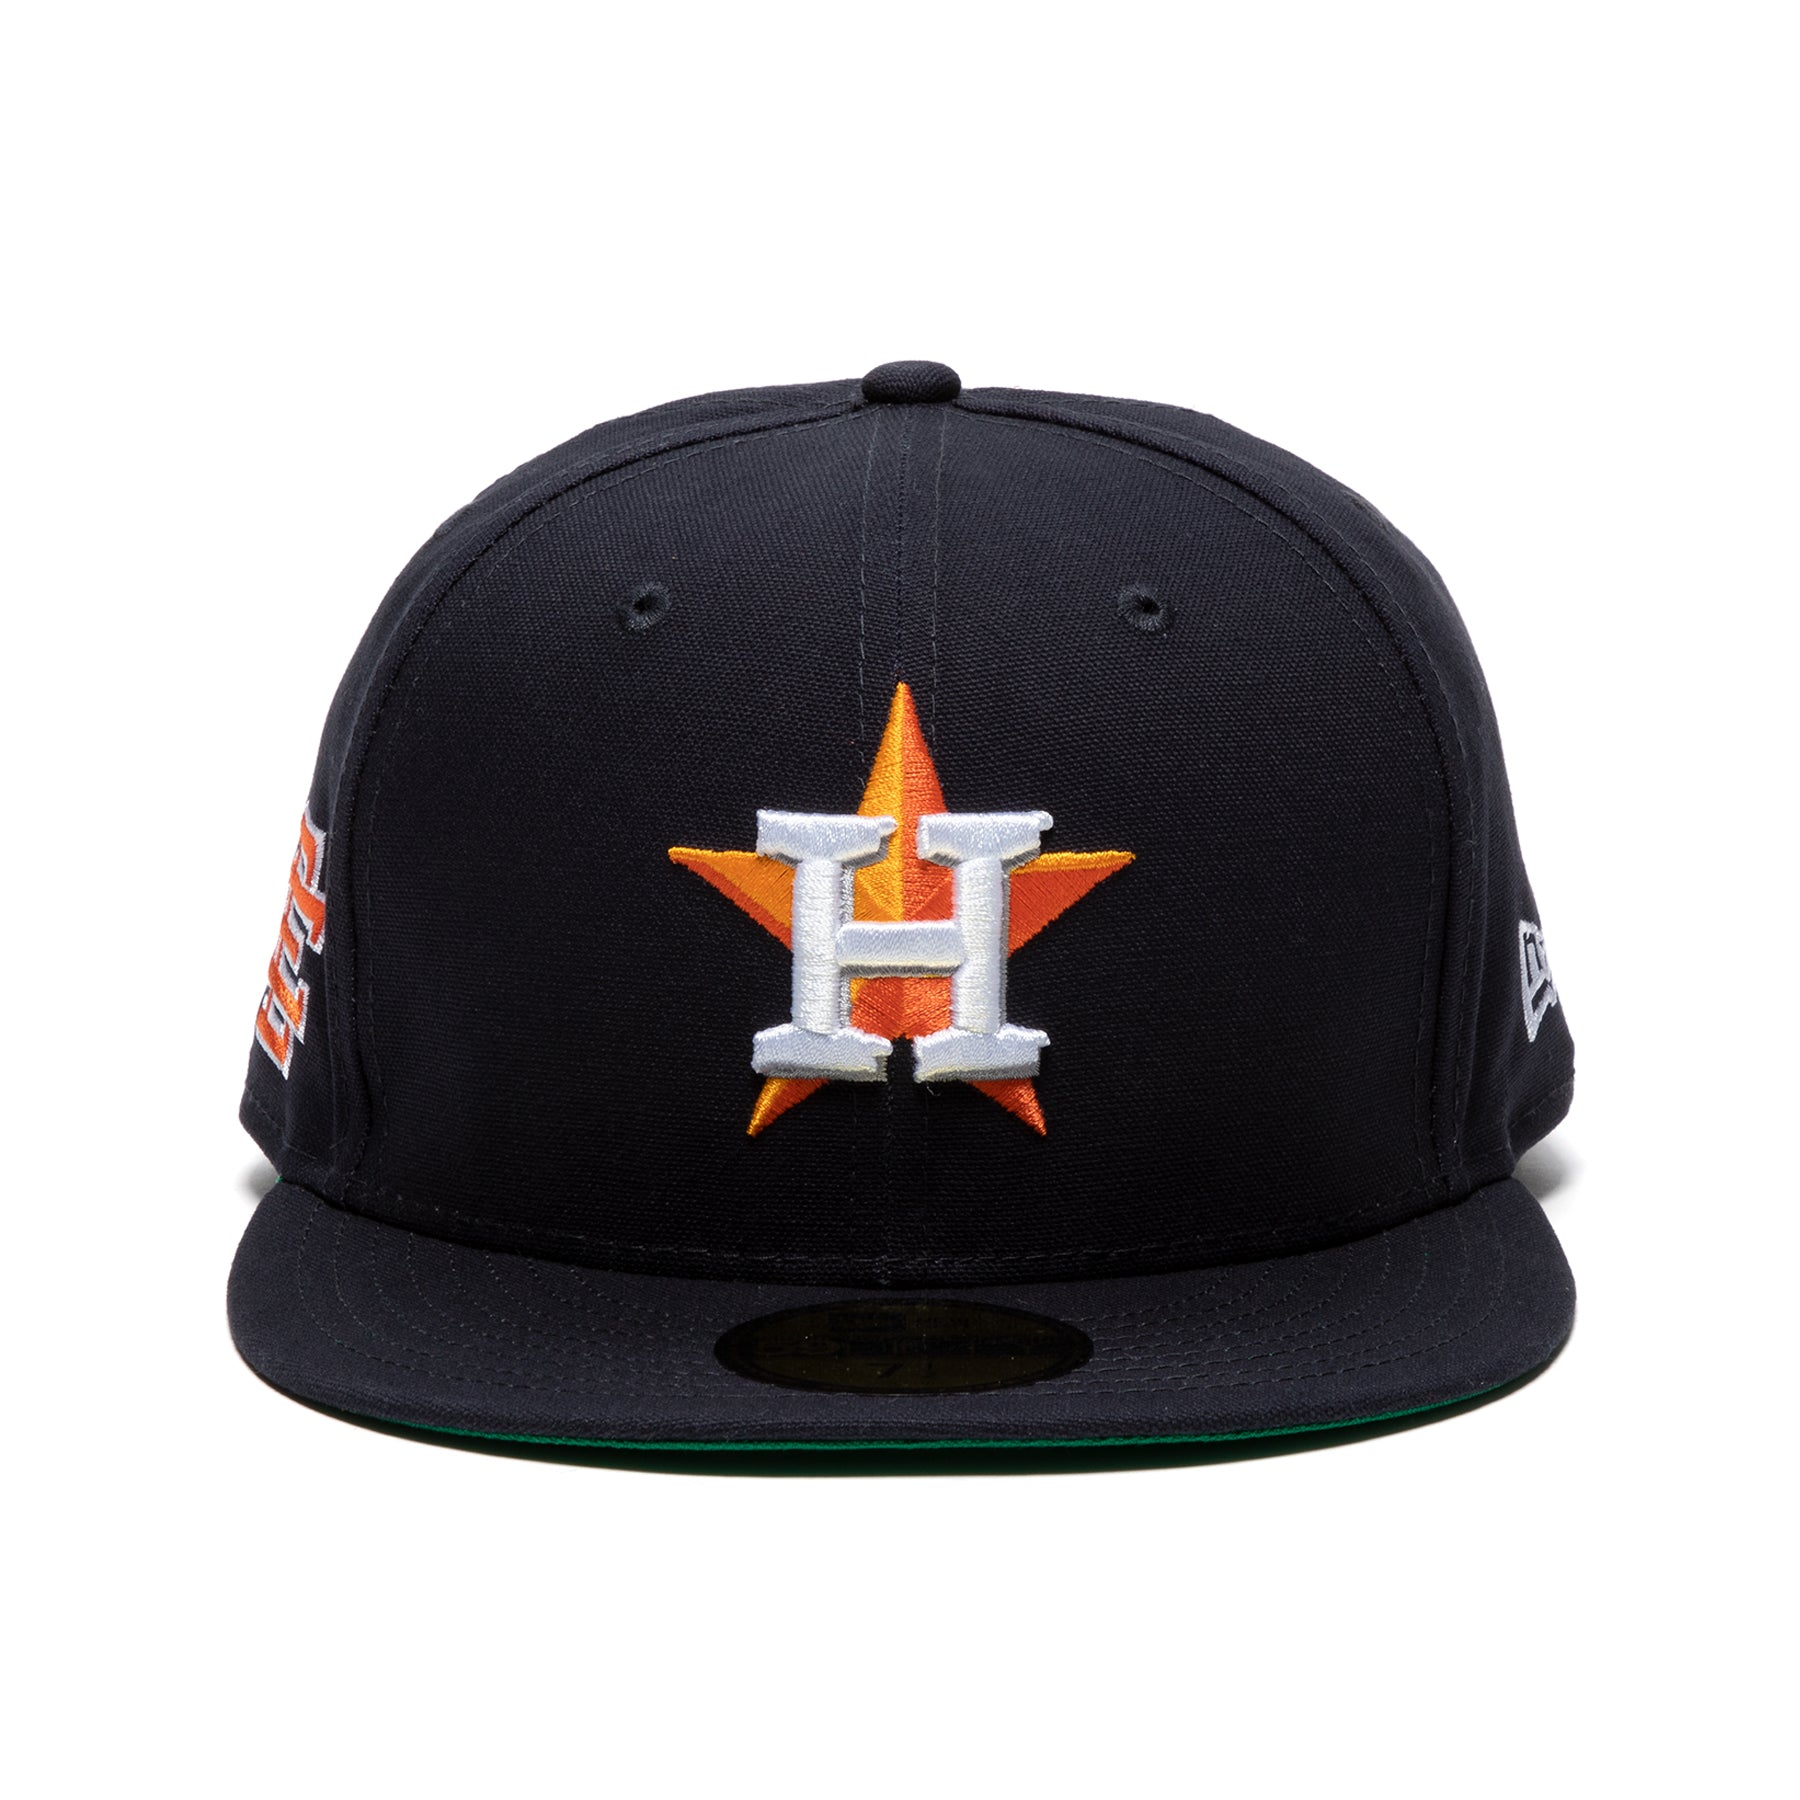 New Era Houston Astros 45th Anniversary Metallic Suede Elite Edition  59Fifty Fitted Hat